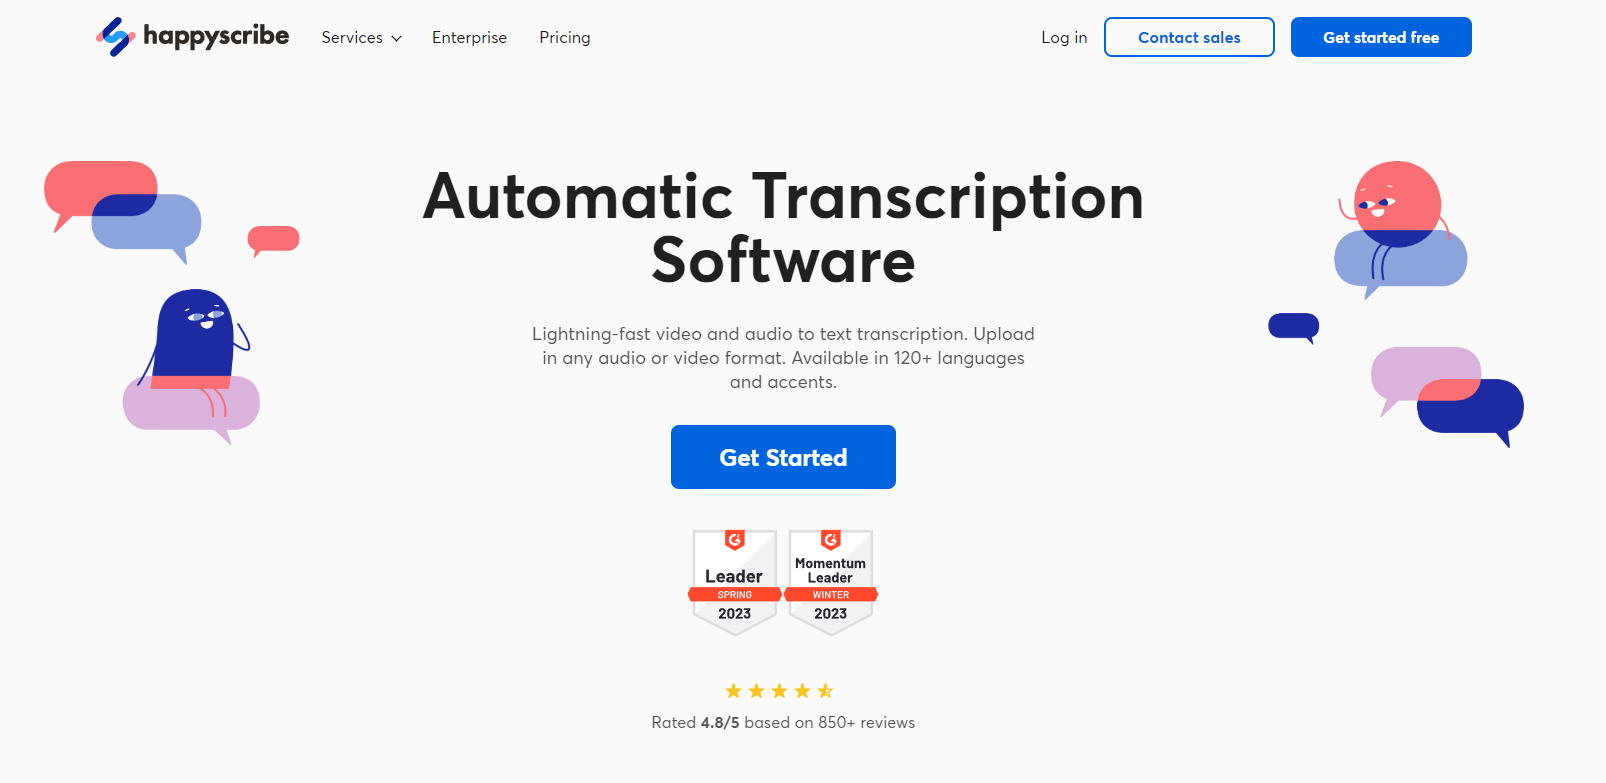 Upload audio and video to get AI transcription with Happy Scribe